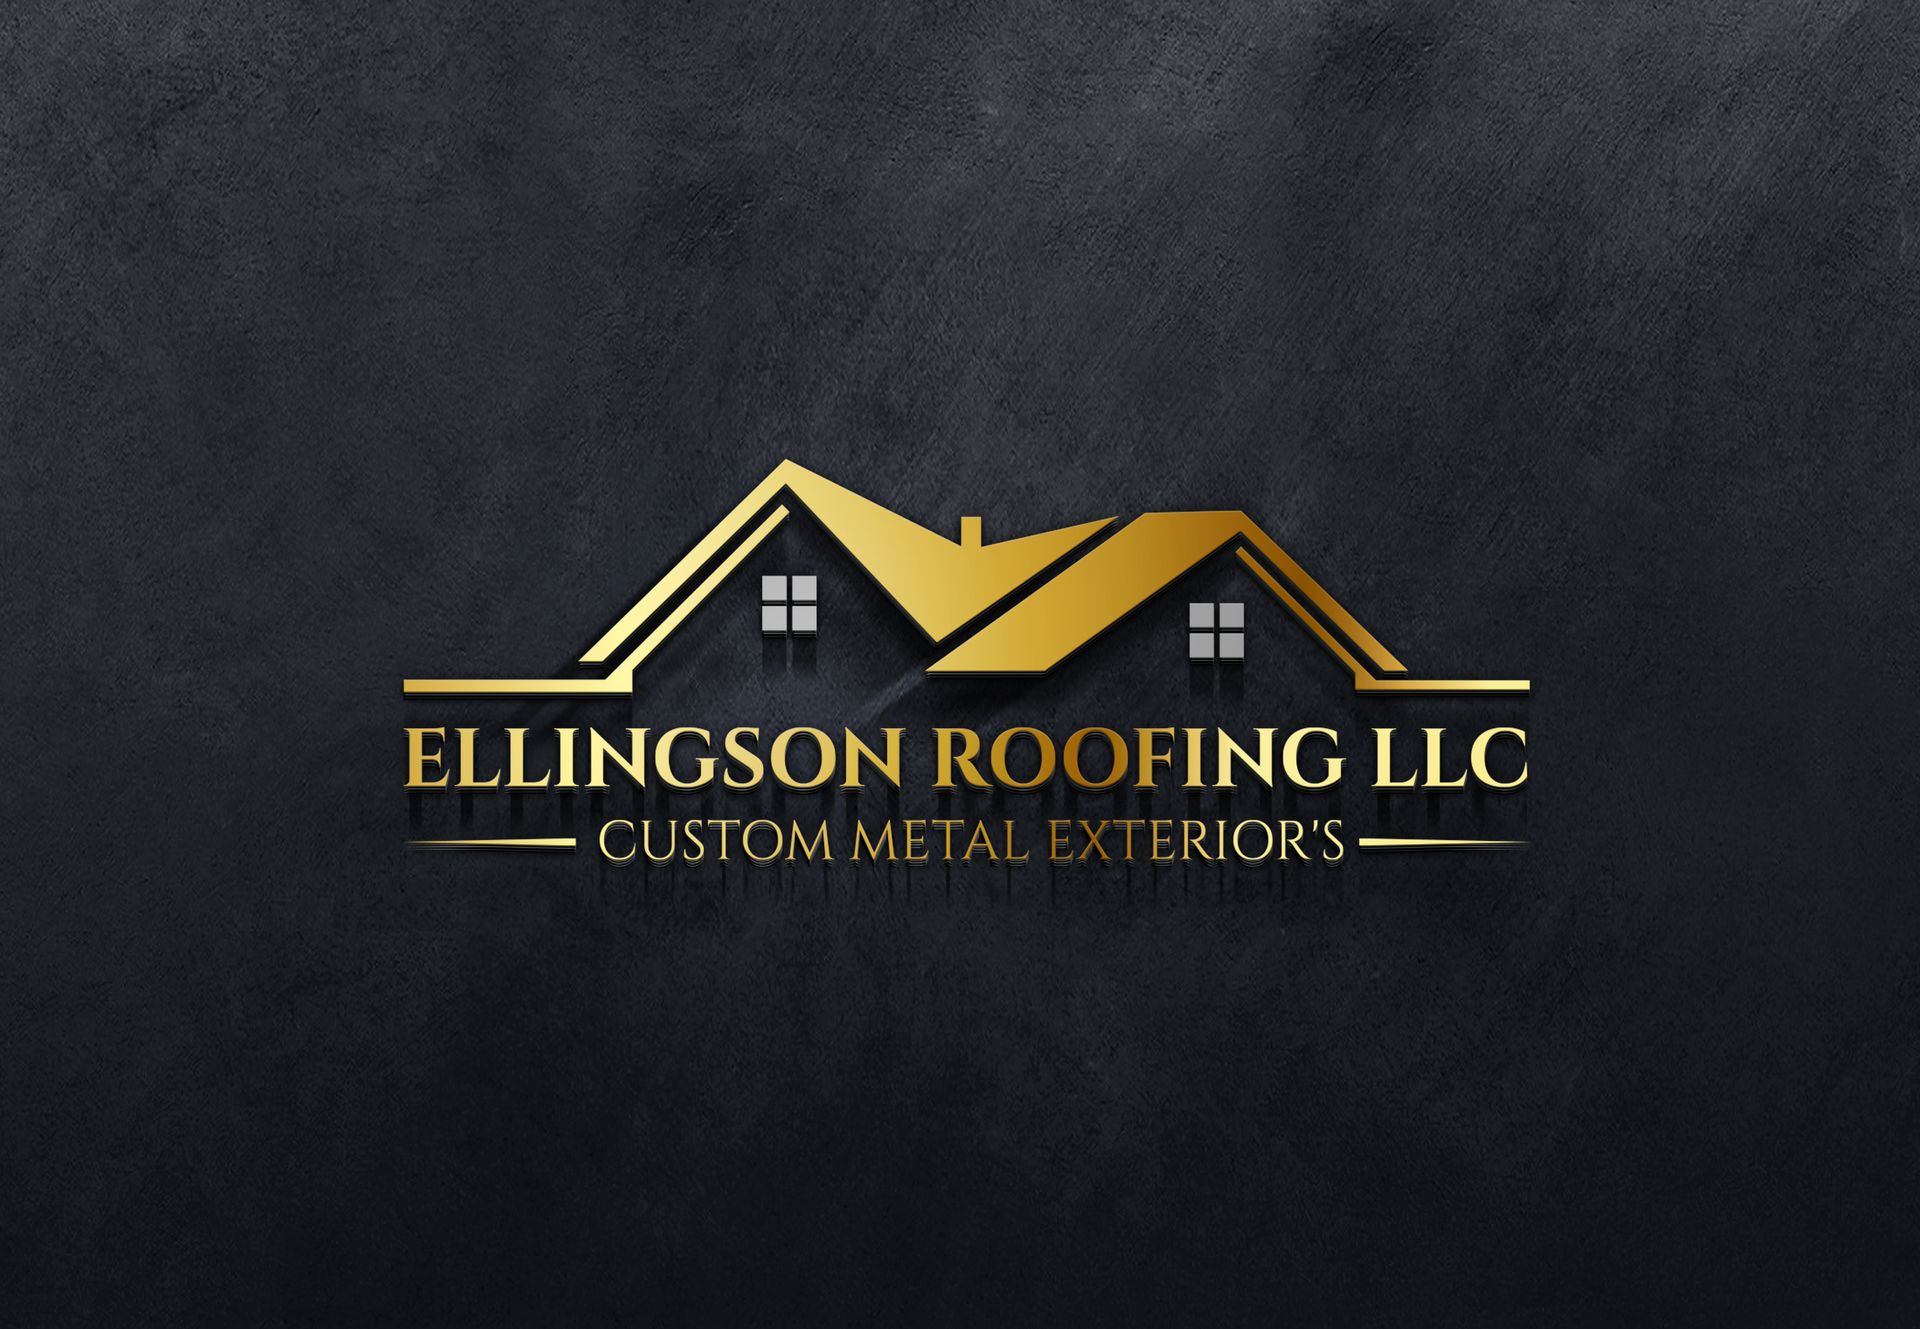 Ellingson Roofing Logo - Roofing Contractor - Siding Contractor - Gutter Contractor